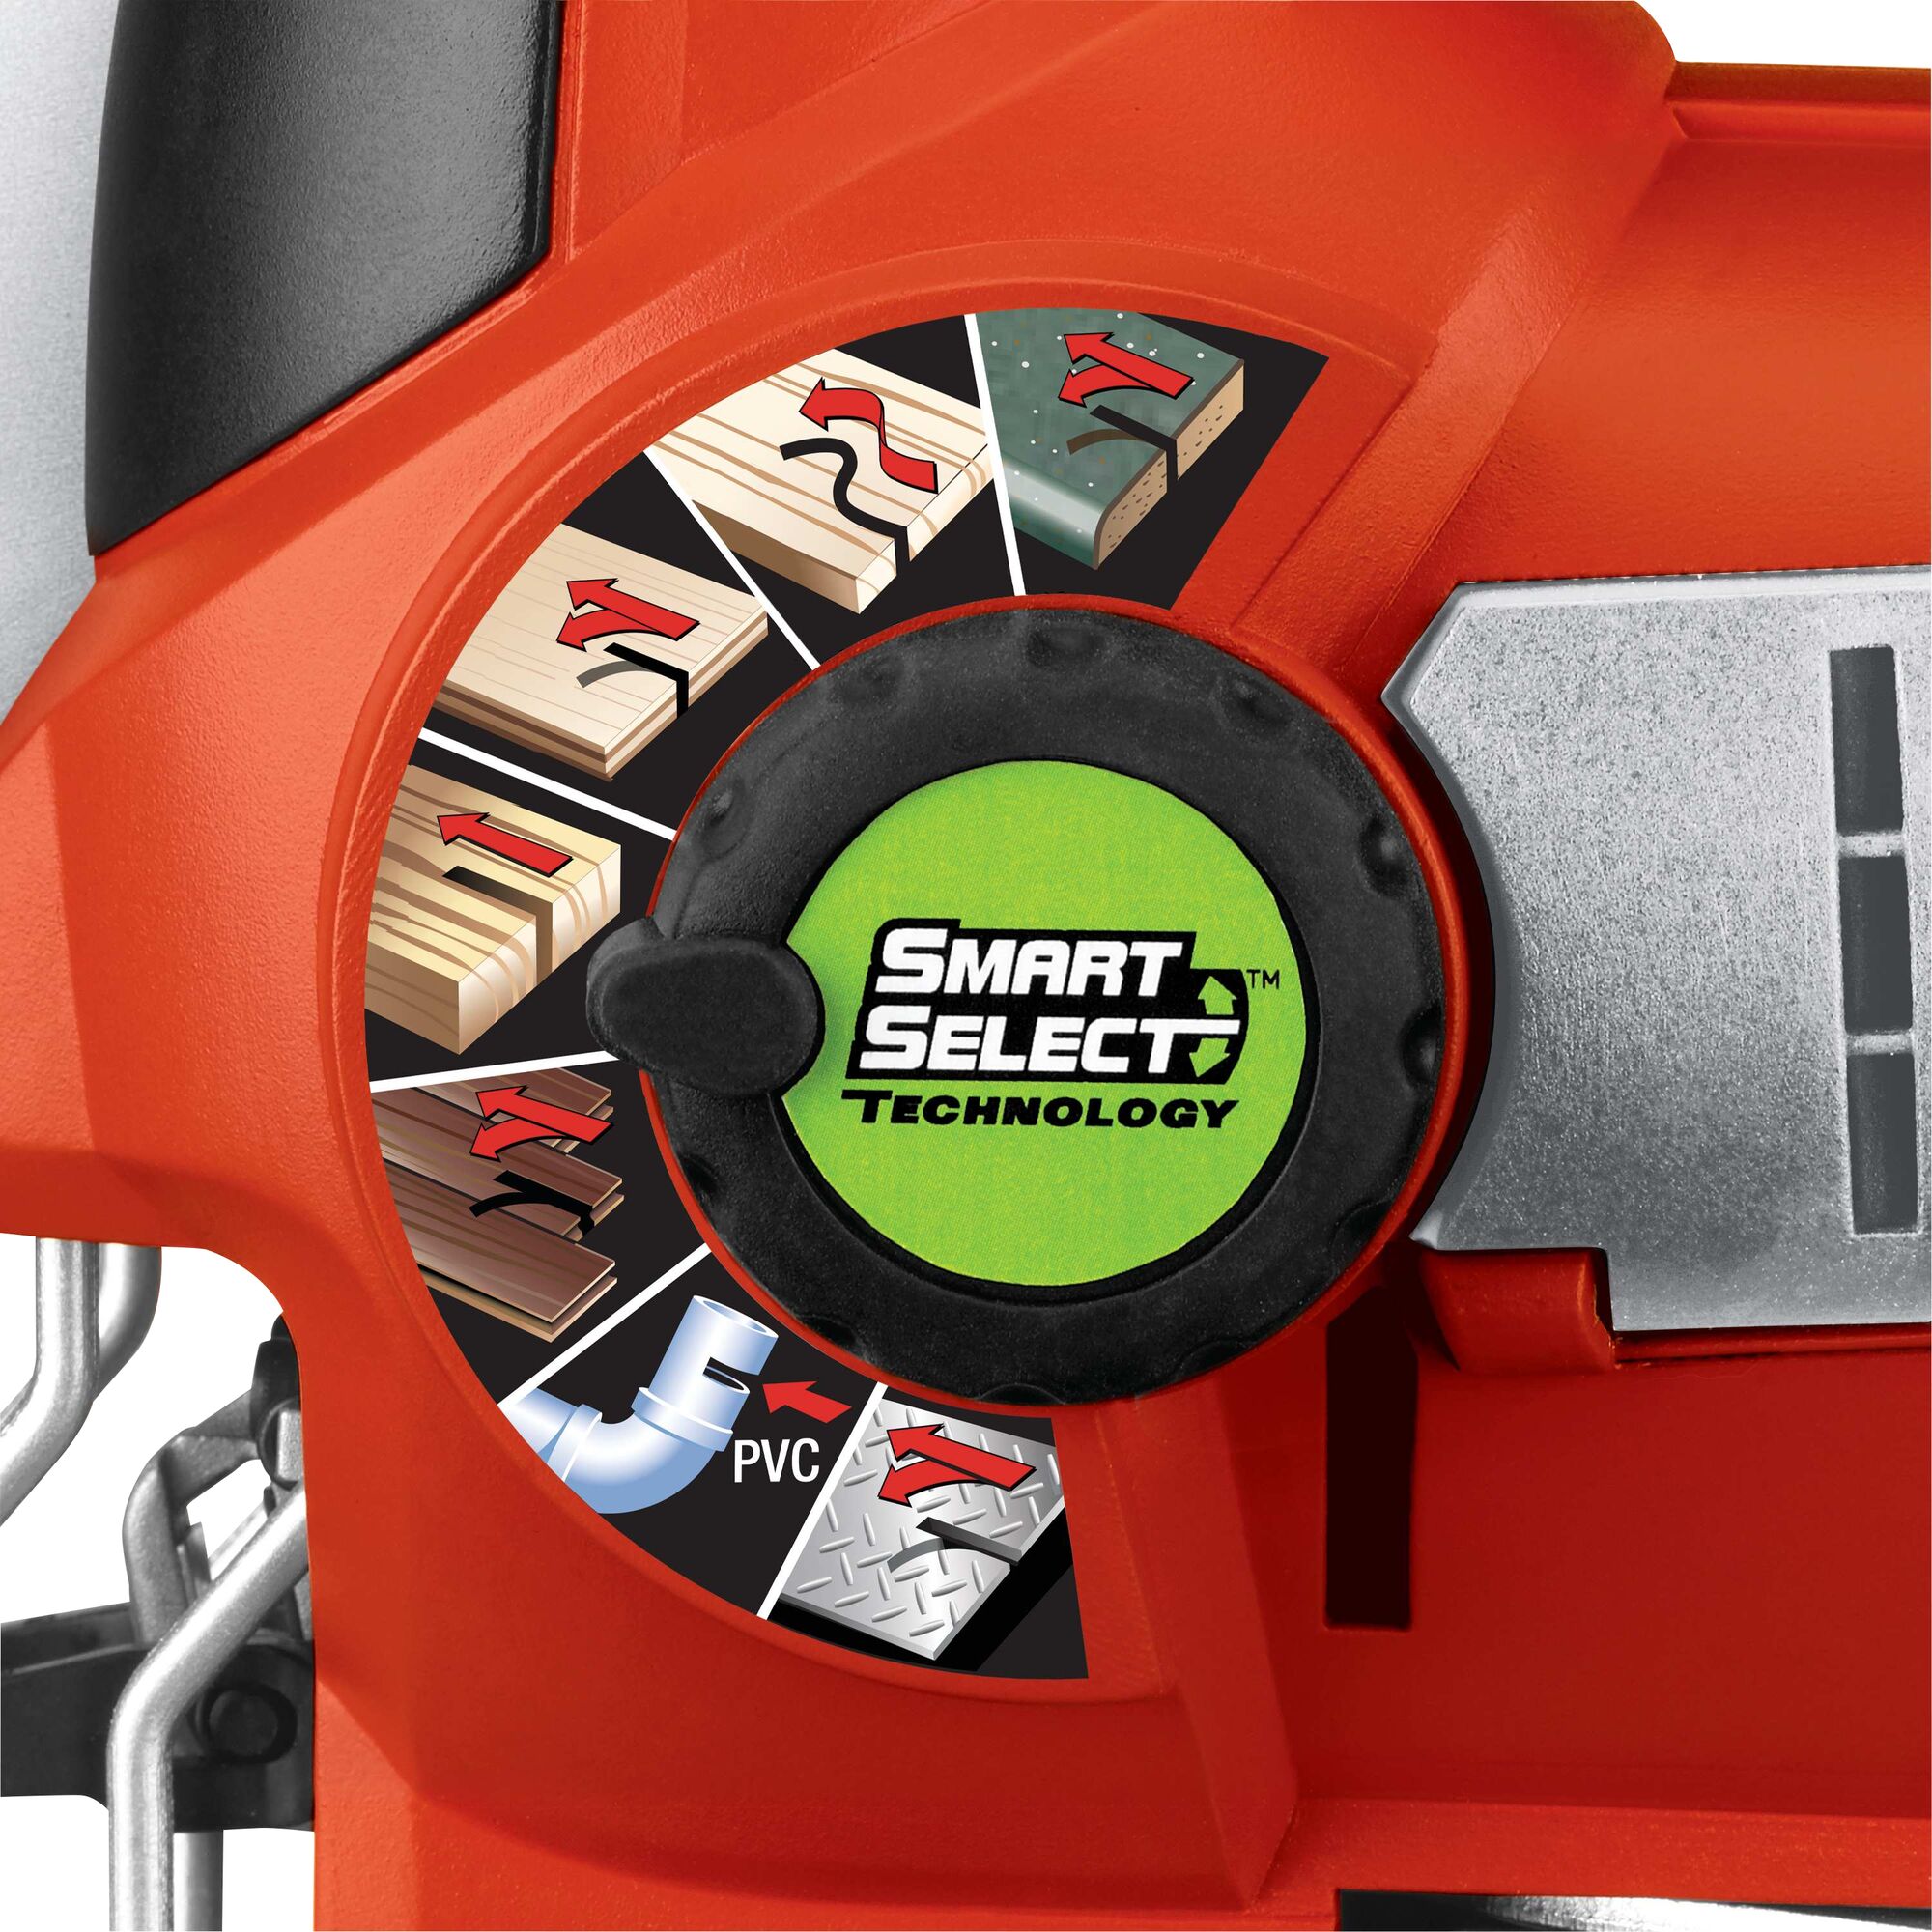 Smart Select dial feature of Linefinder 6 amp orbital jigsaw with smart select technology.